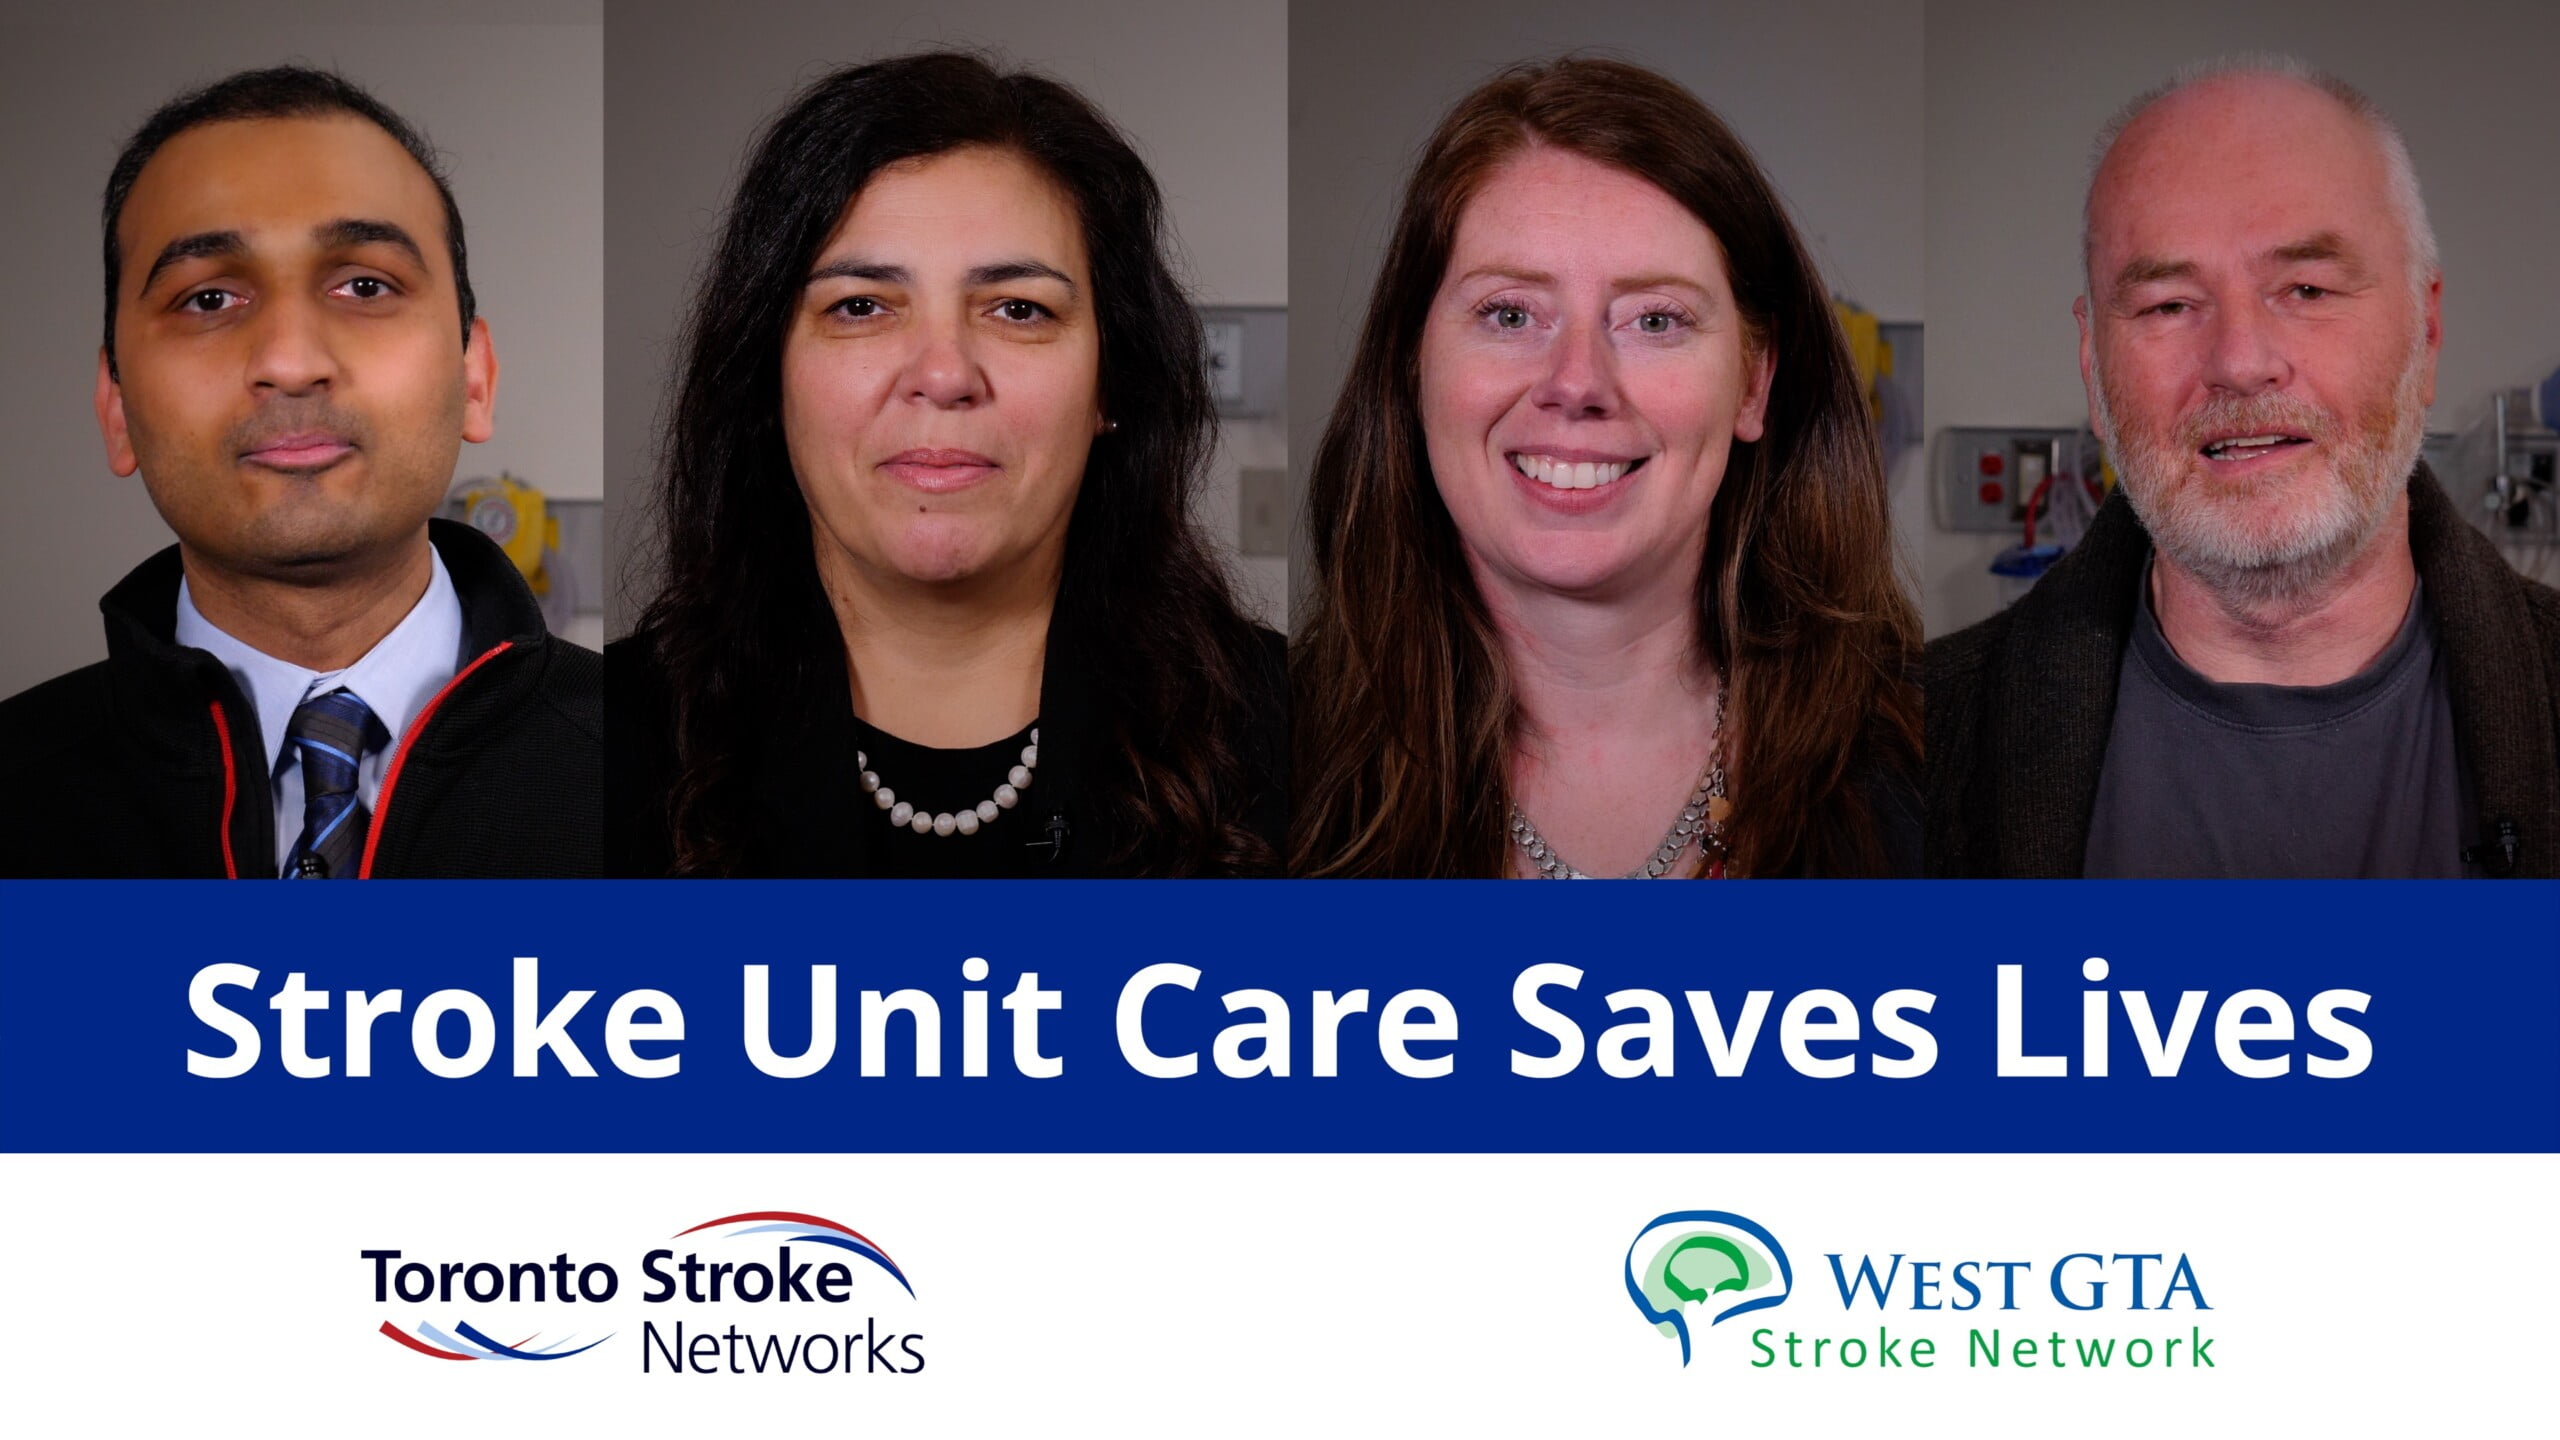 3 experts in stroke care and one stroke survivor